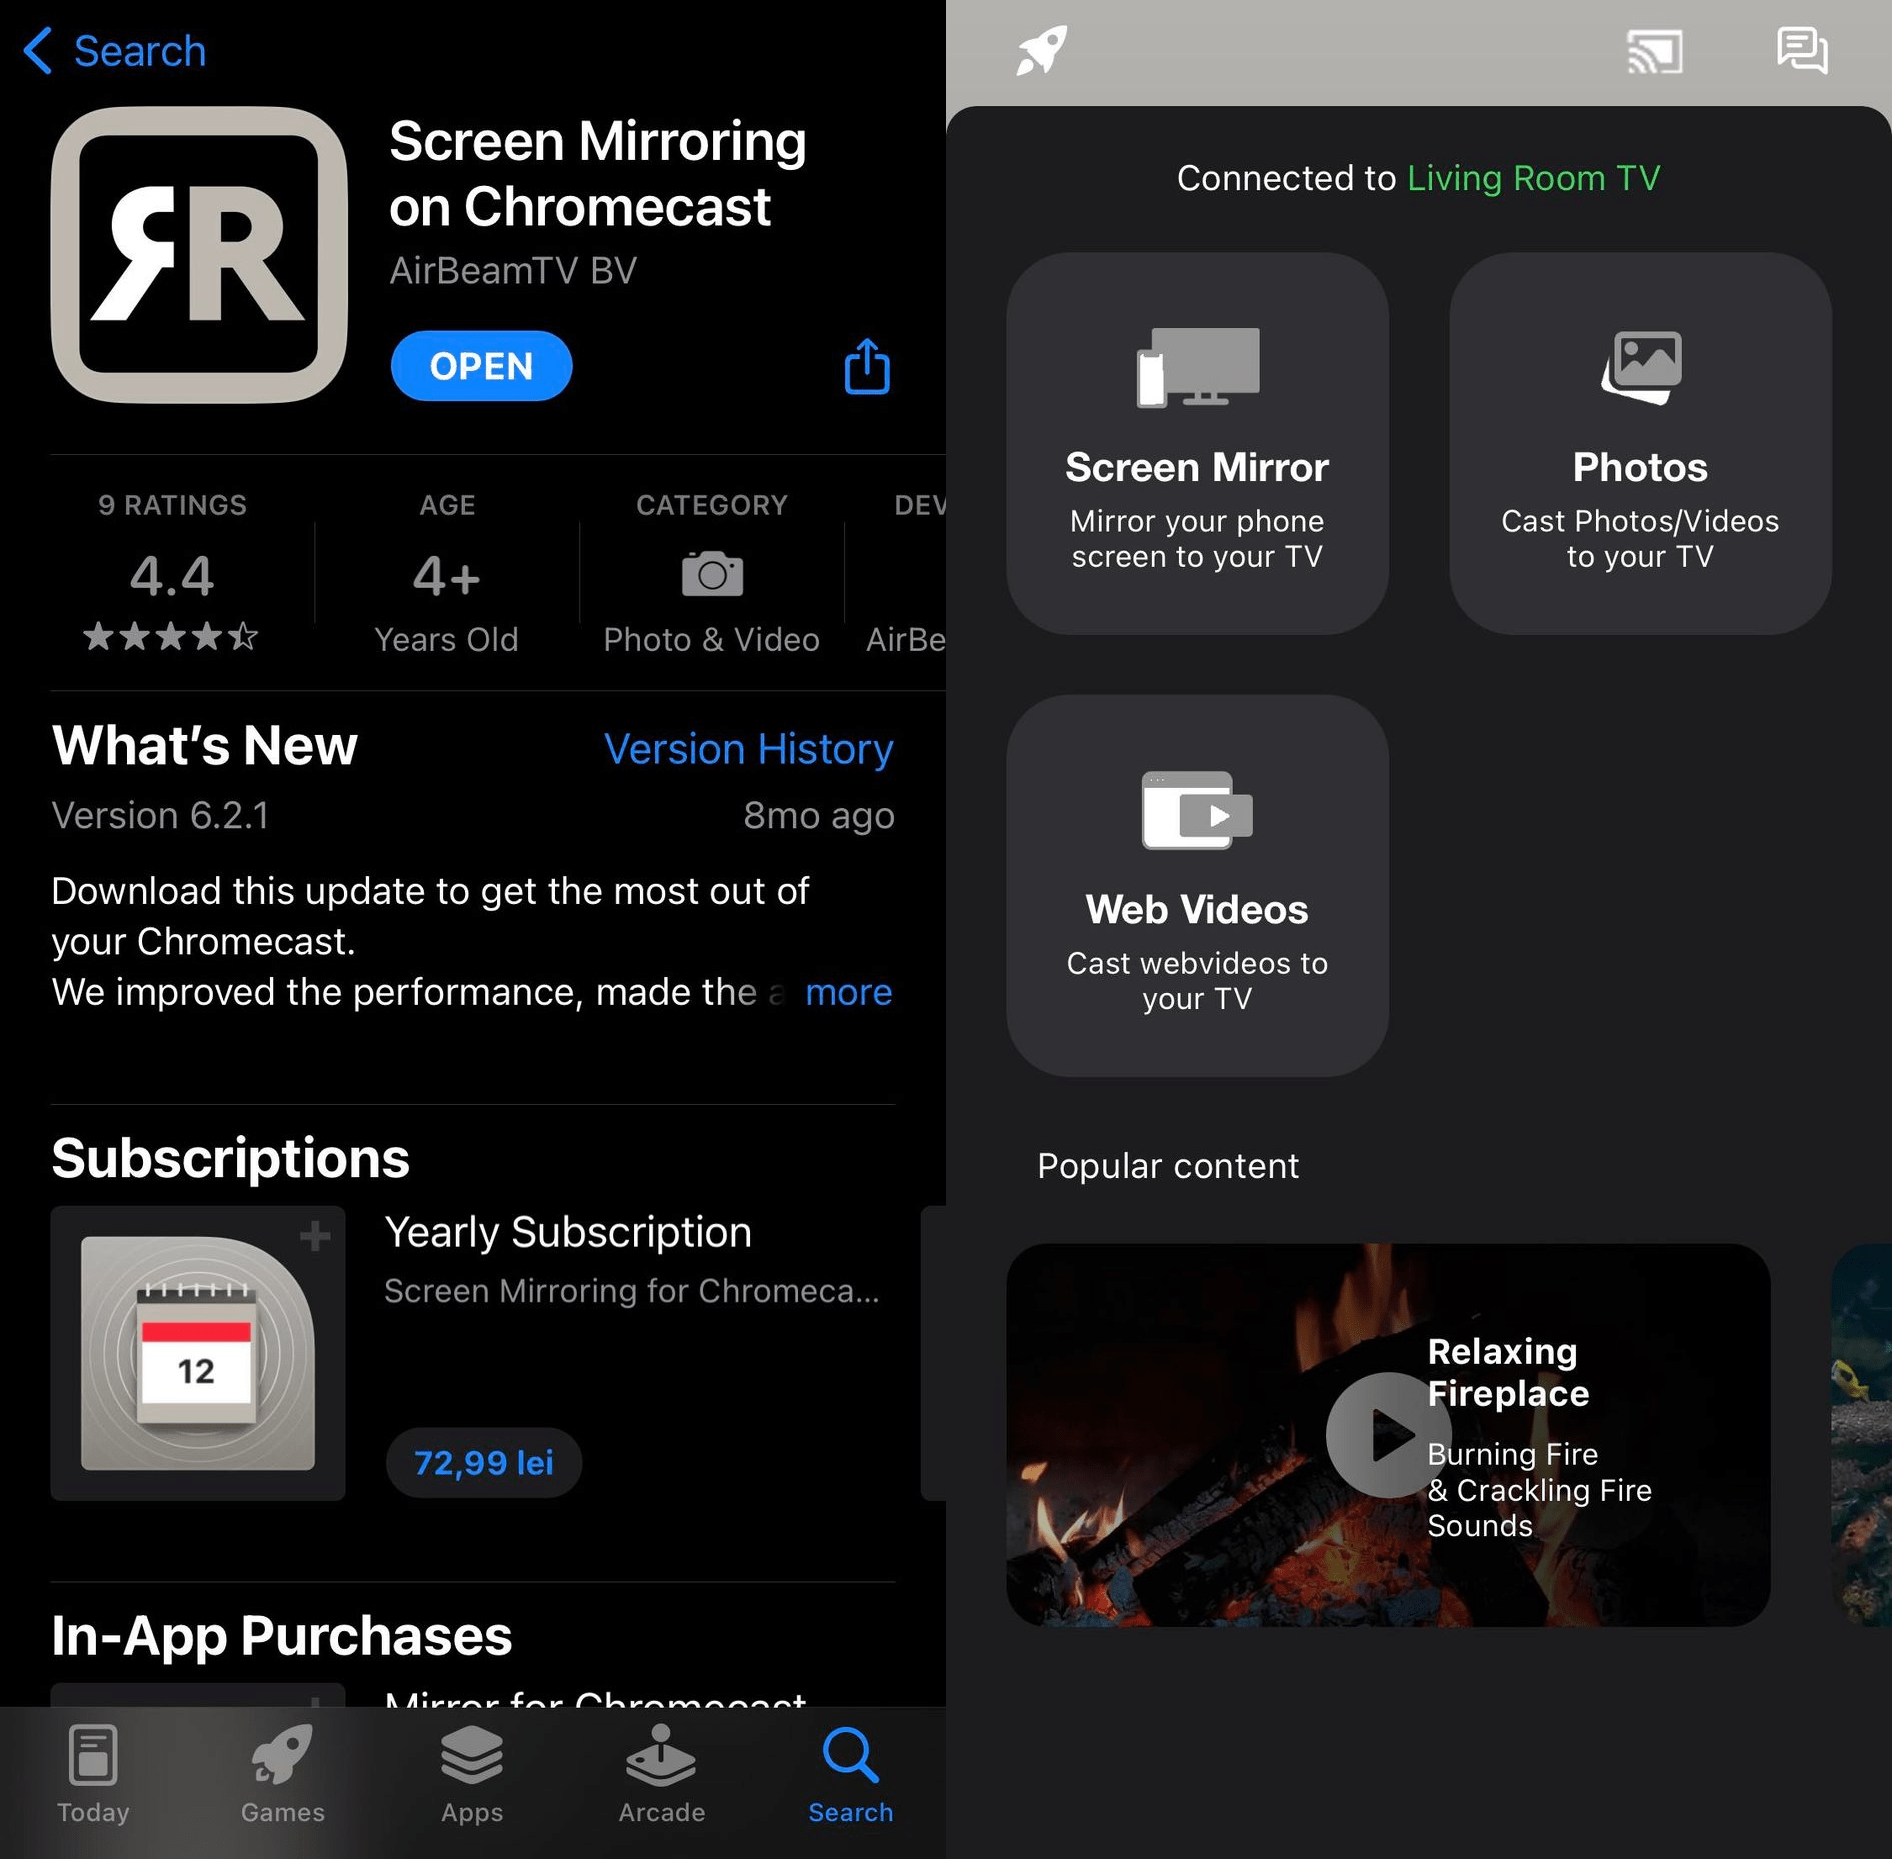 The AirBeamTV Screen Mirroring on Chromecast app on the App Store and its homepage when launched